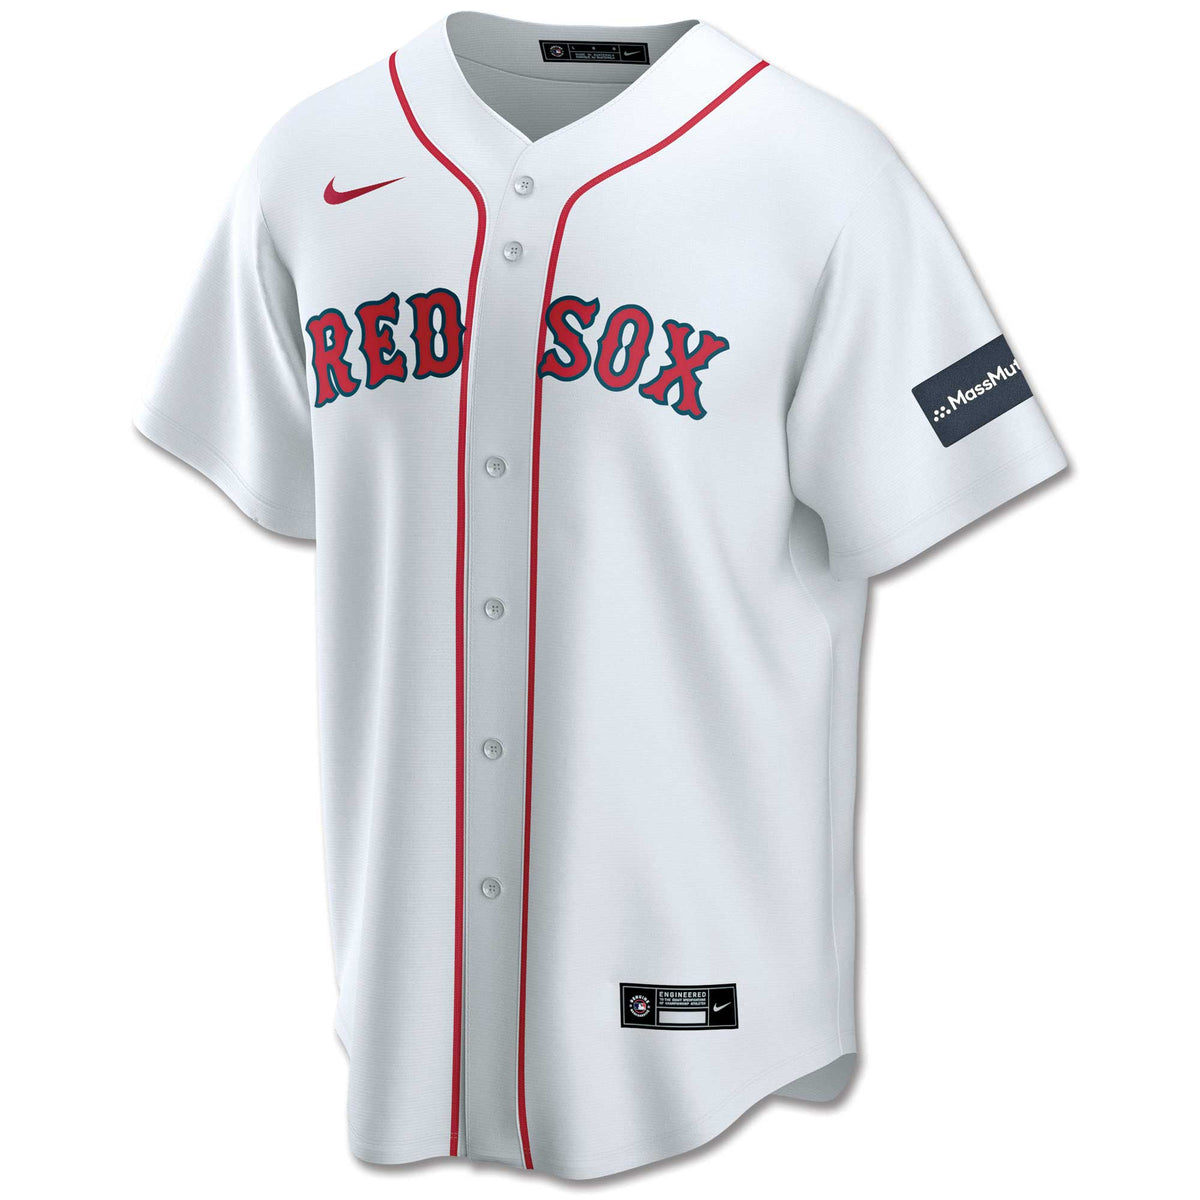 Red Sox will have MassMutual logo on their jerseys beginning in